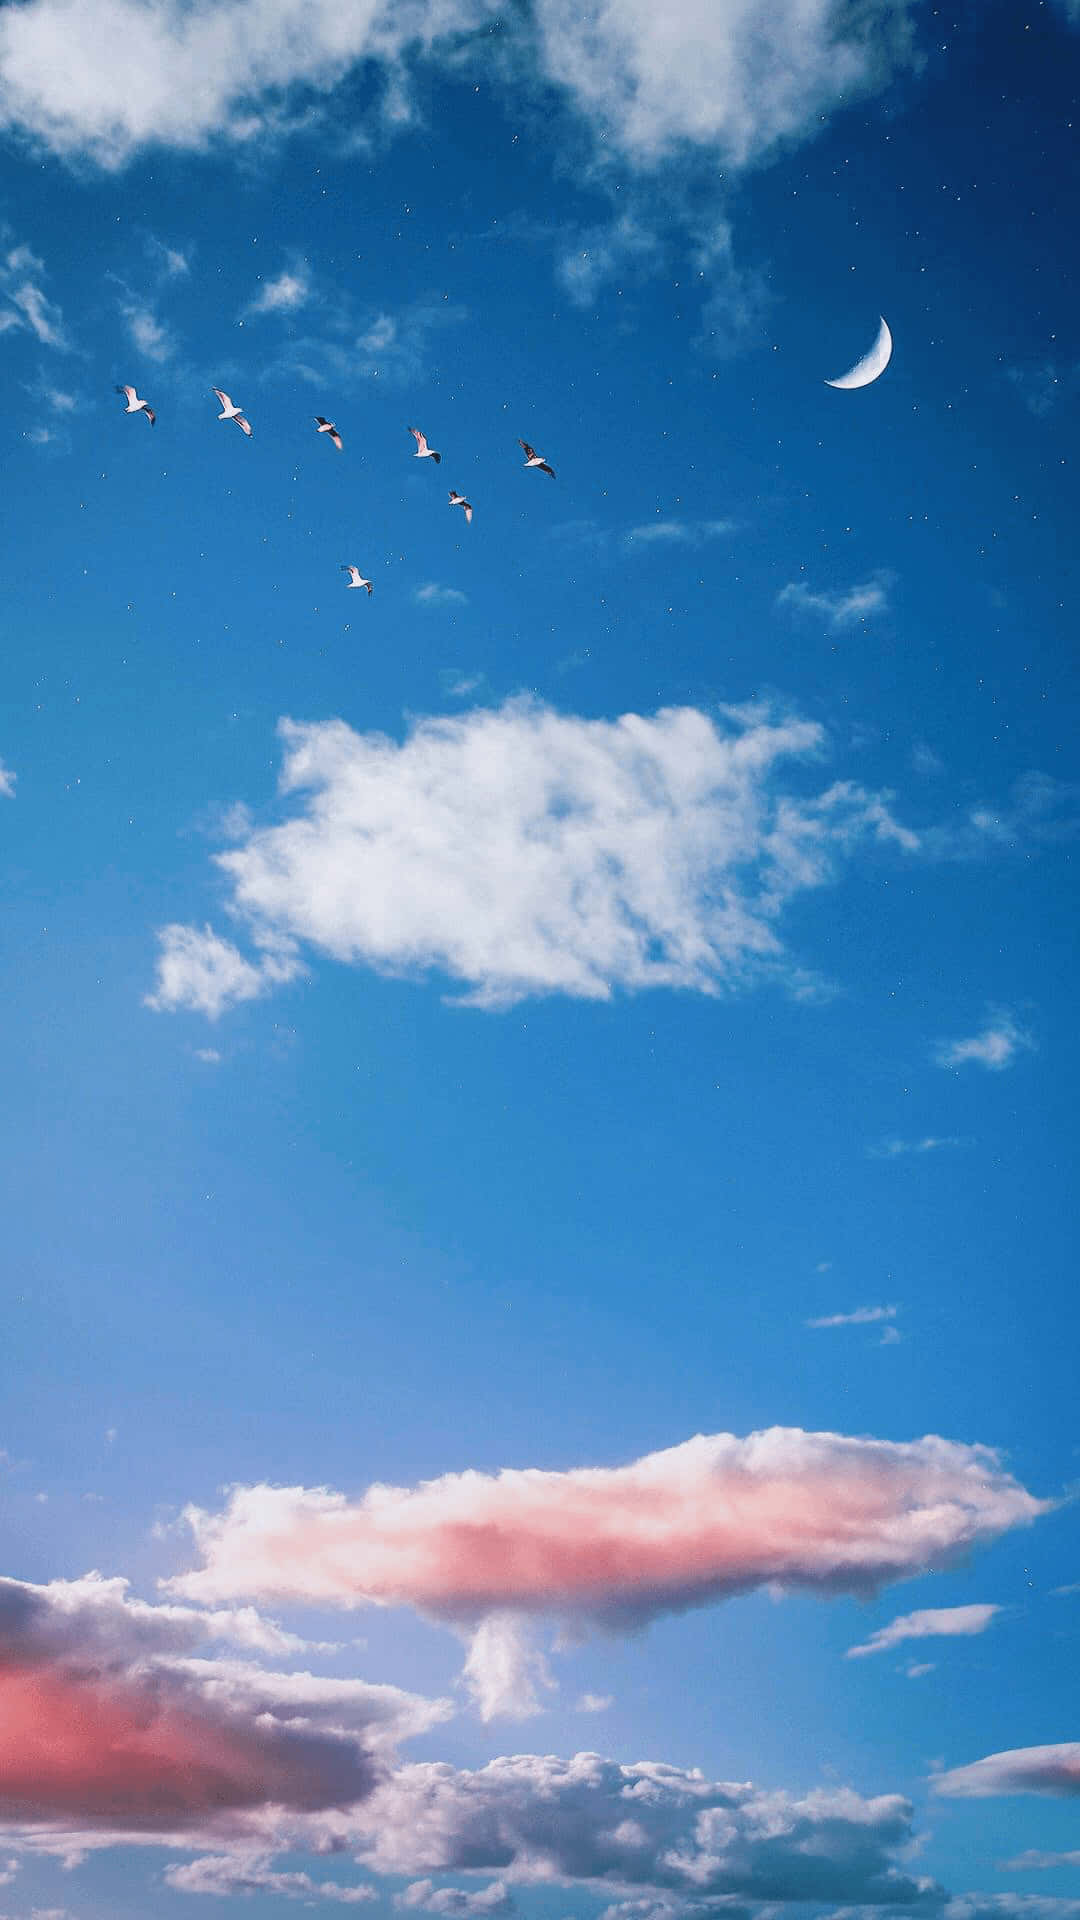 Take a break and appreciate the beauty of the clouds Wallpaper